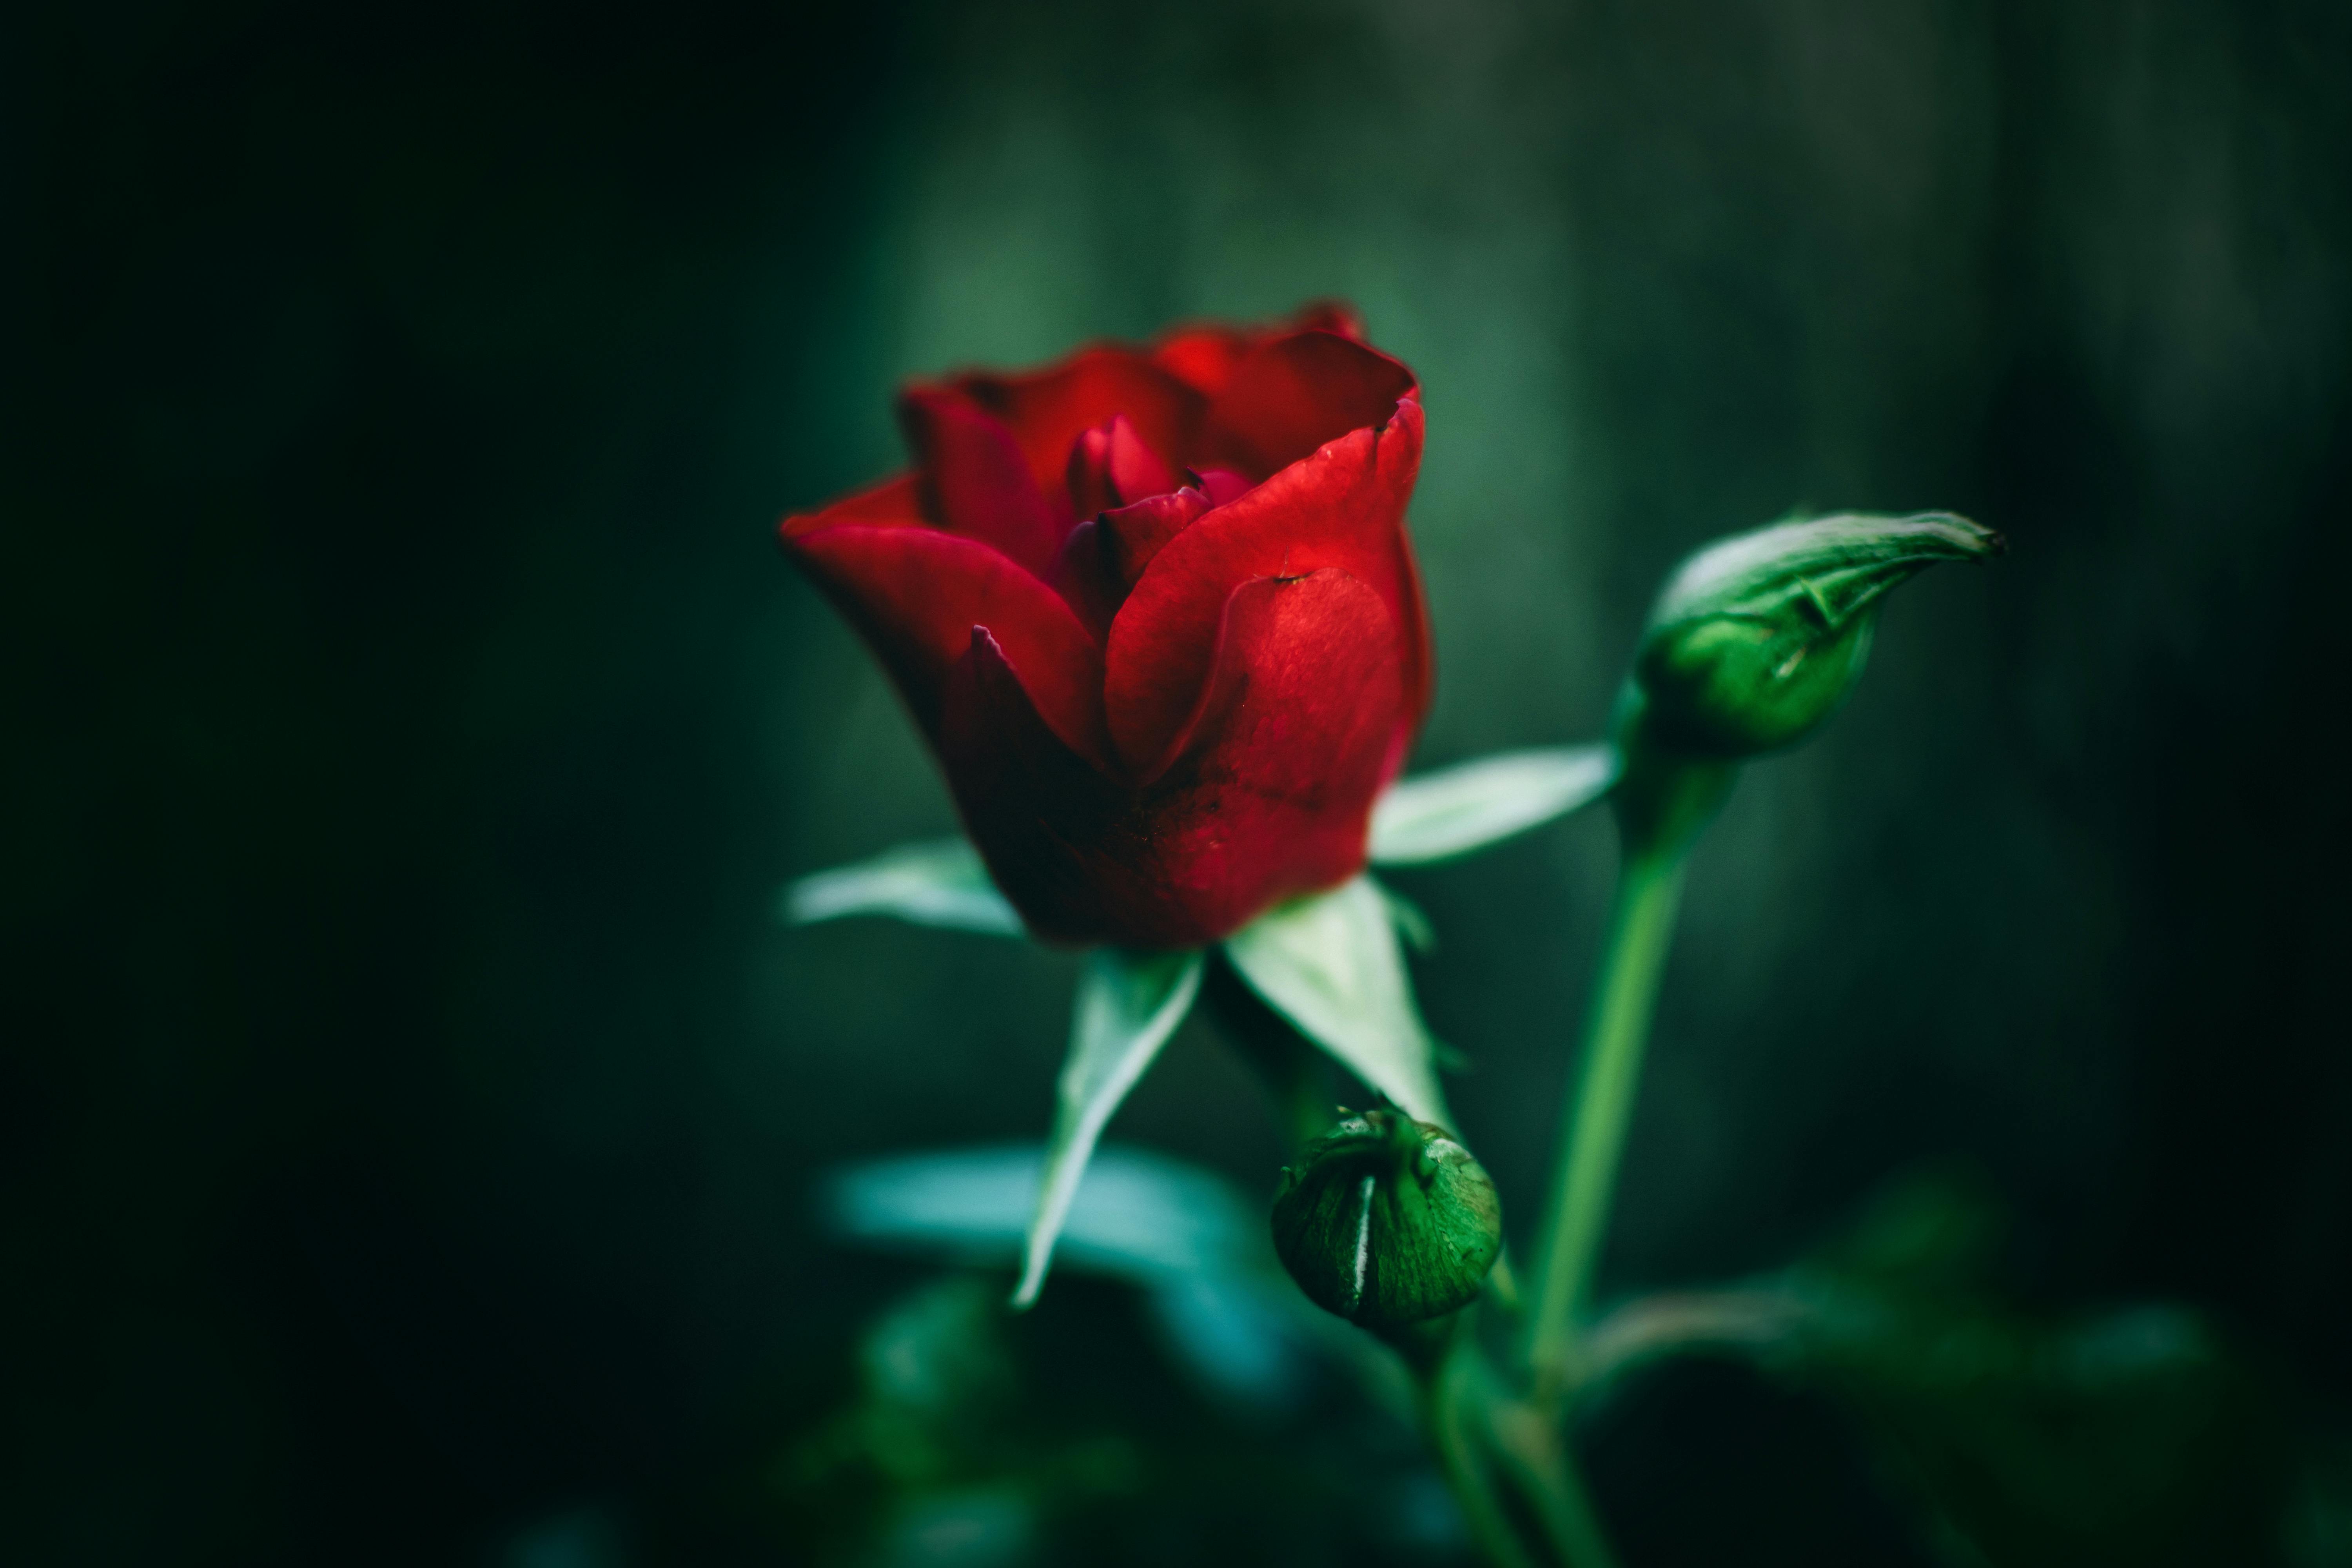 Red Rose Photos Download The BEST Free Red Rose Stock Photos  HD Images